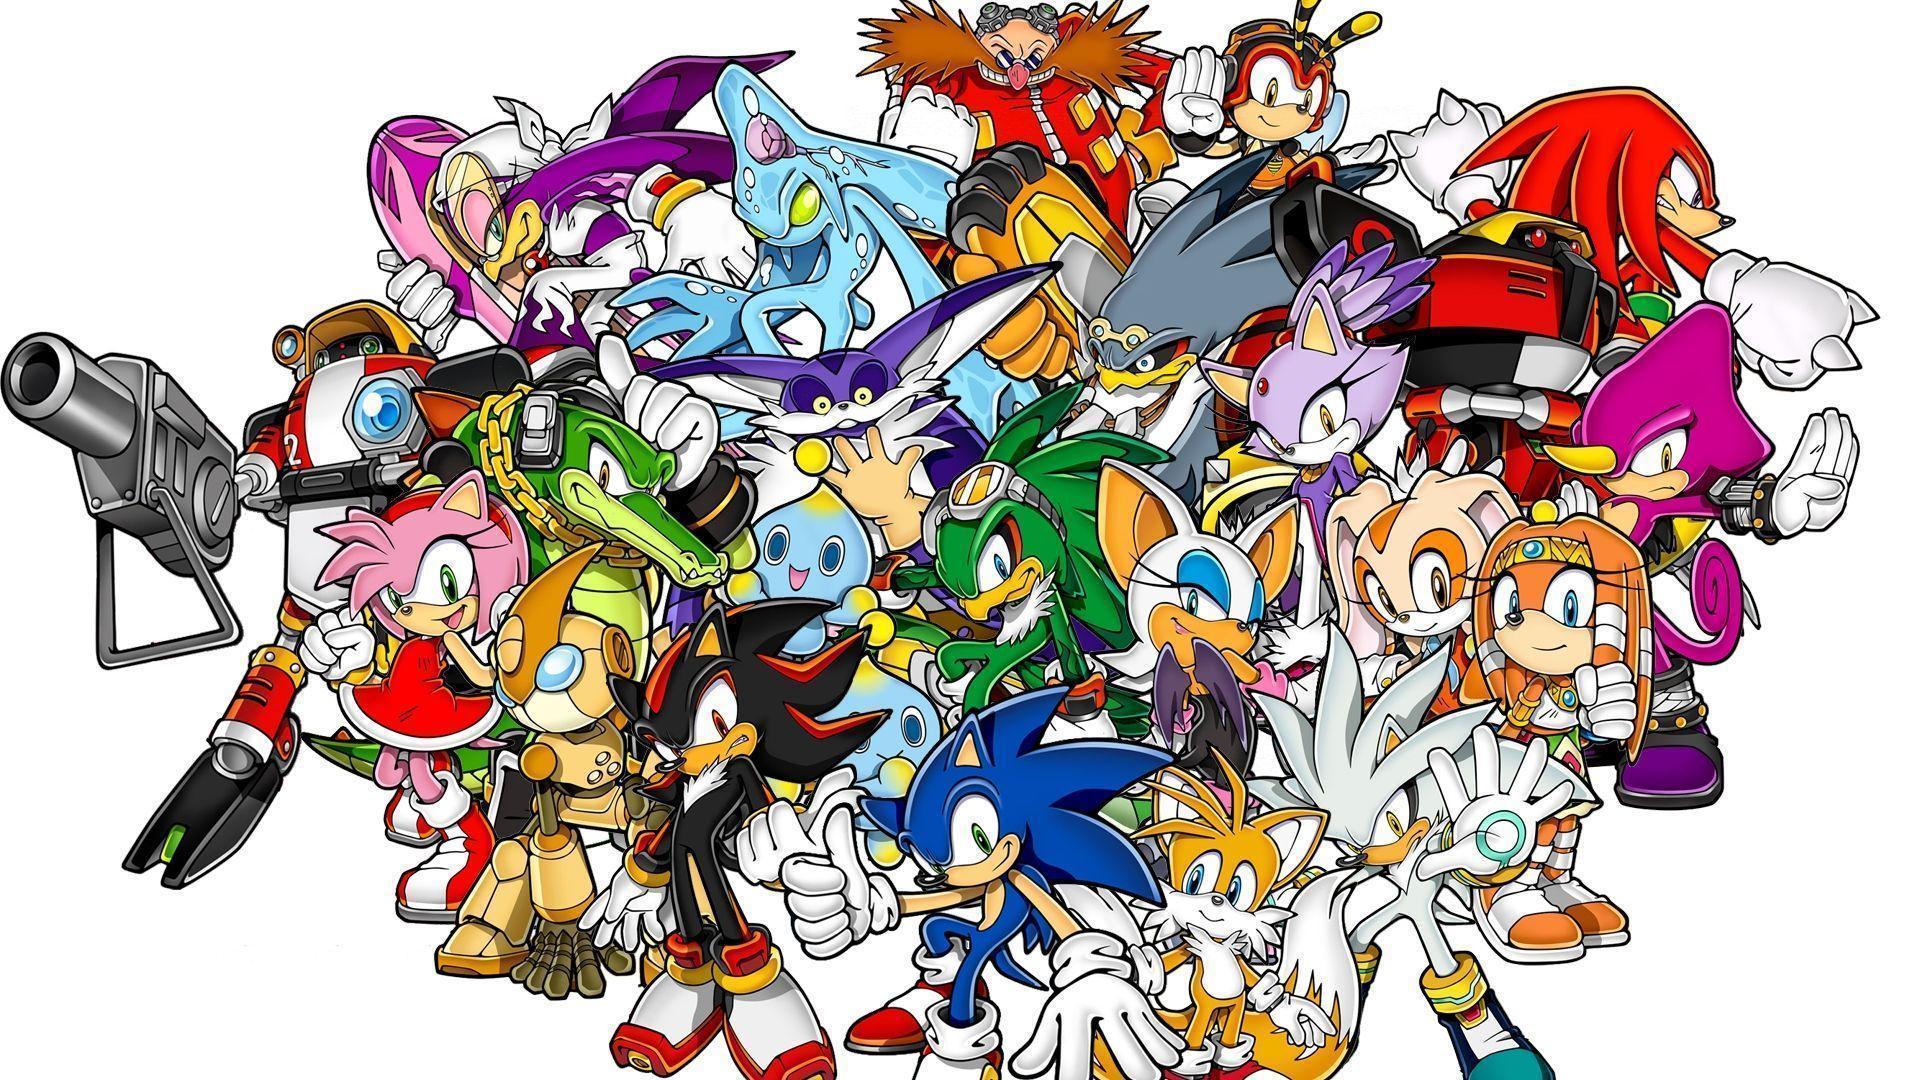 Sonic Team confirm new Sonic the Hedgehog game for 2017